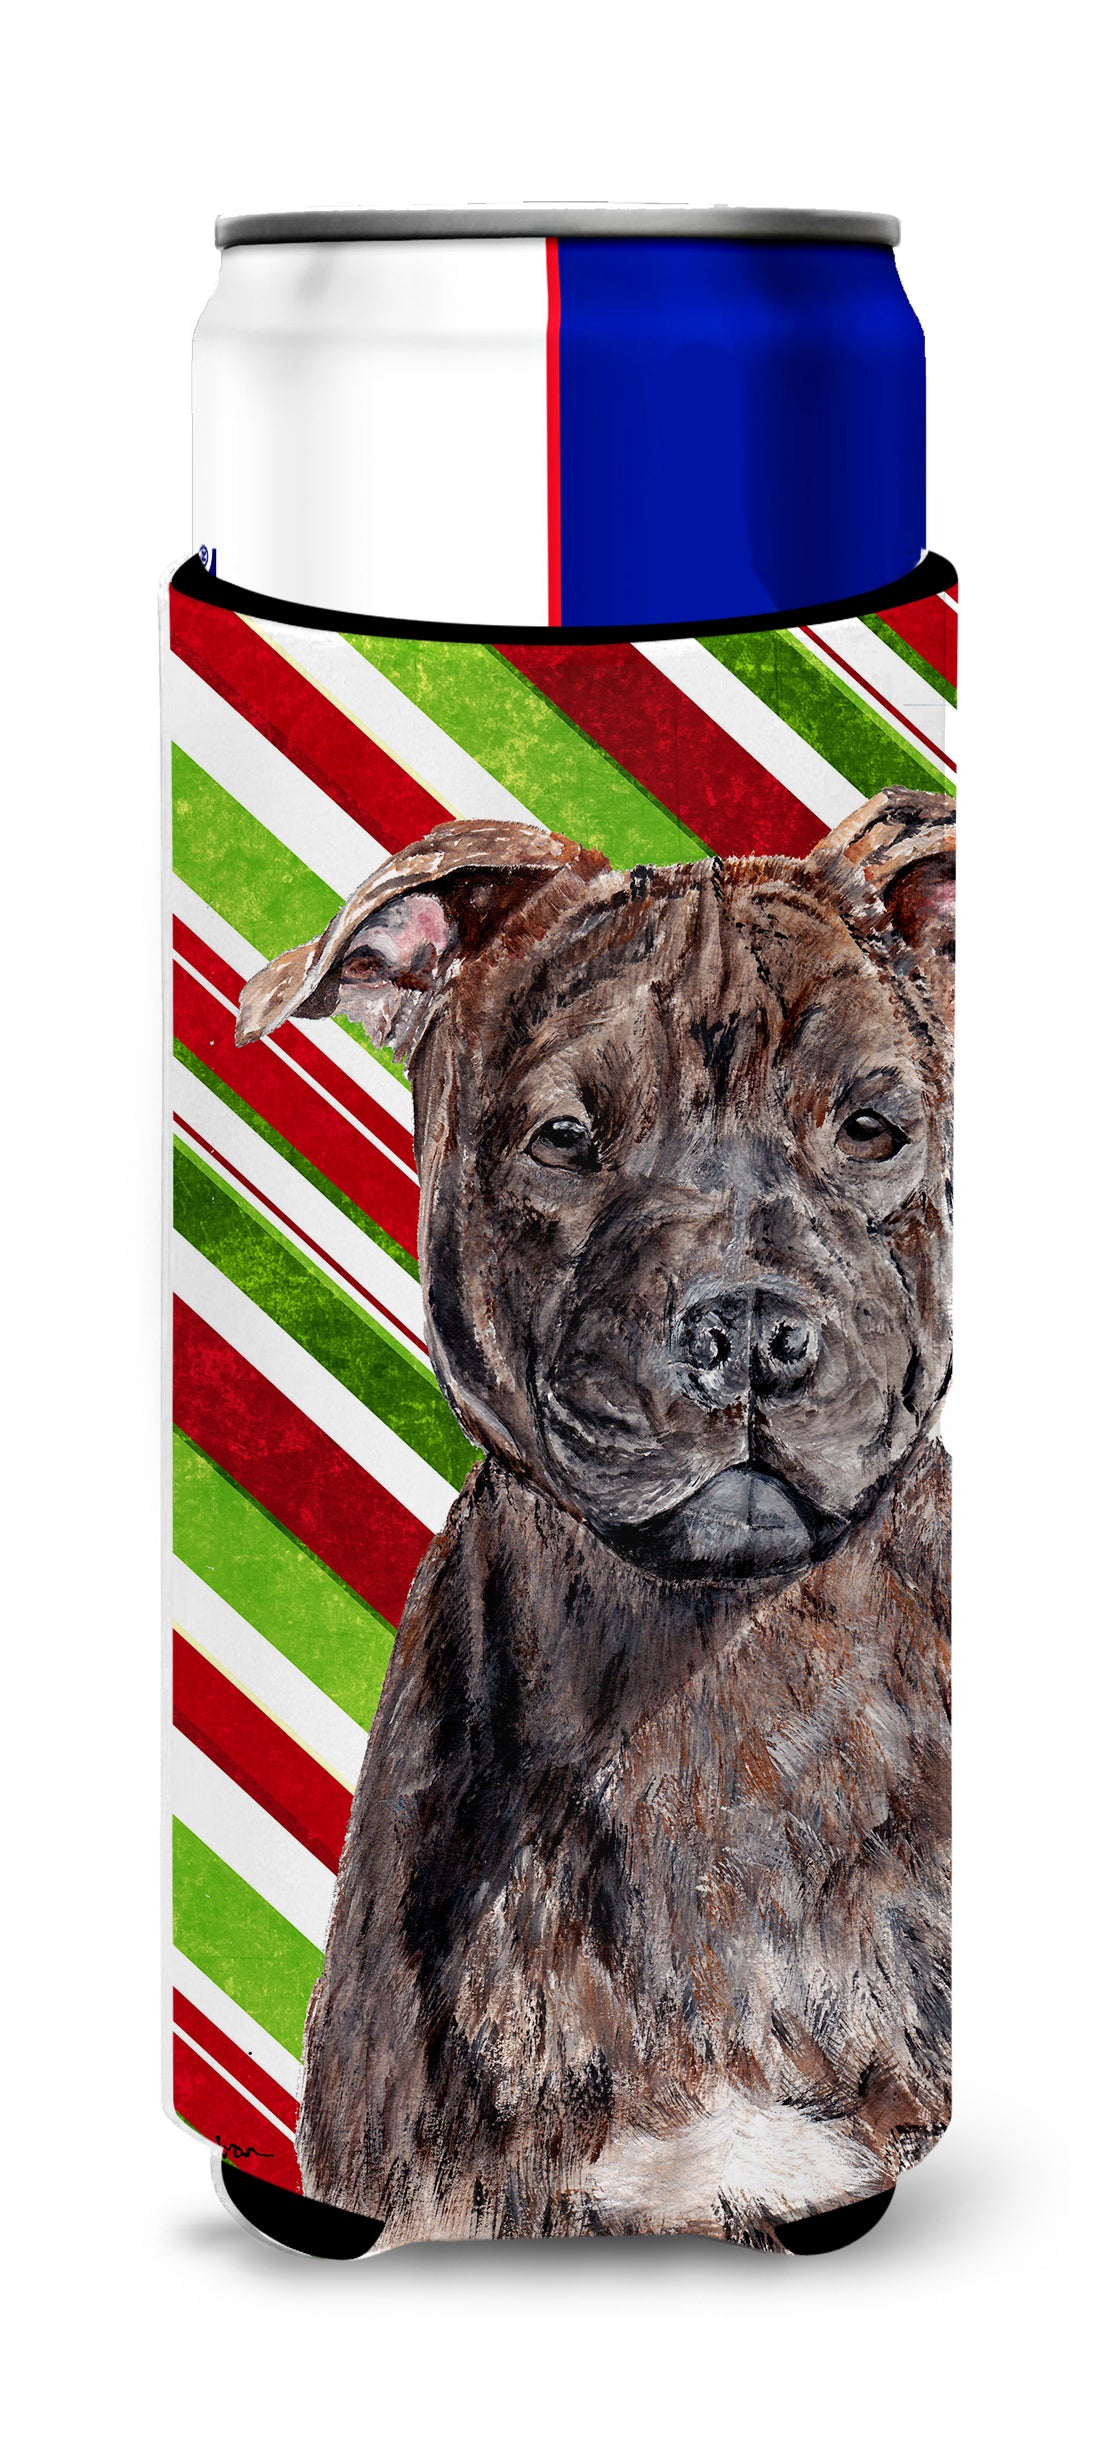 Staffordshire Bull Terrier Staffie Candy Cane Christmas Ultra Beverage Insulators for slim cans SC9801MUK